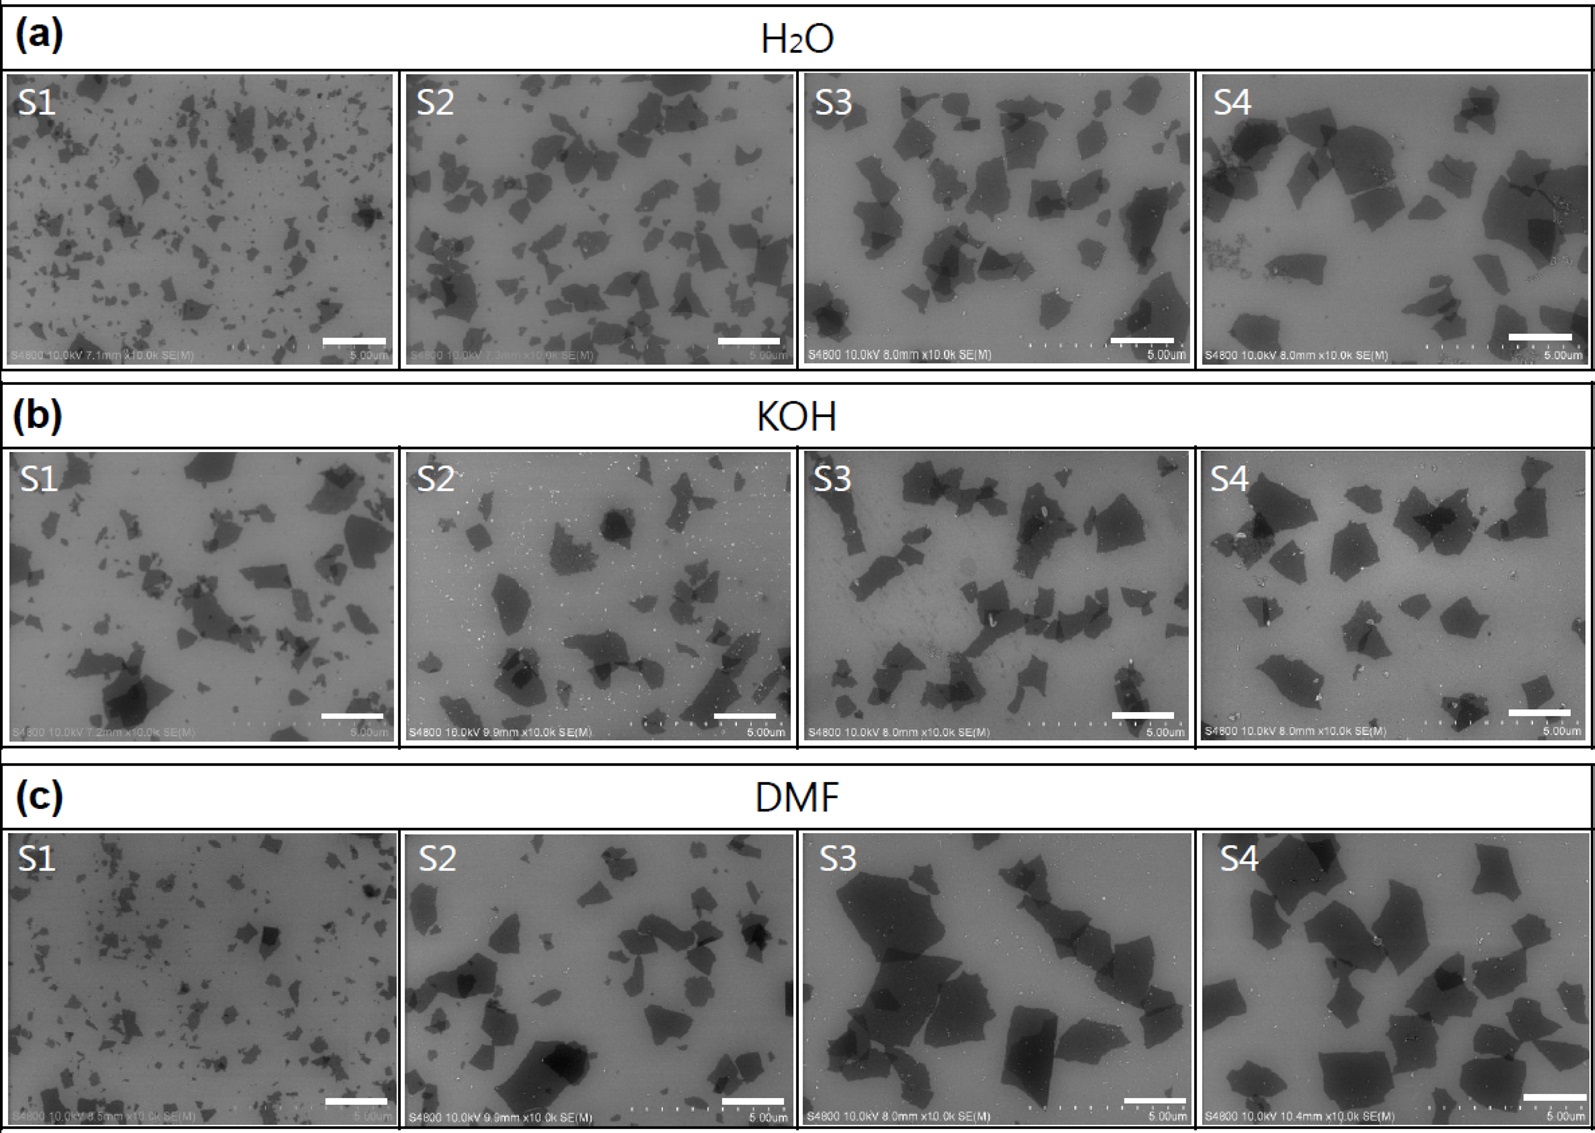 Scanning electron microscopy images of separated graphene oxide nanoplatelets (from S1 to S4) using (a) H2O, (b) potassium hydroxide (KOH) (c) dimethylformamide (DMF) as dispersion solvents. Scale bars indicate 2 μm.